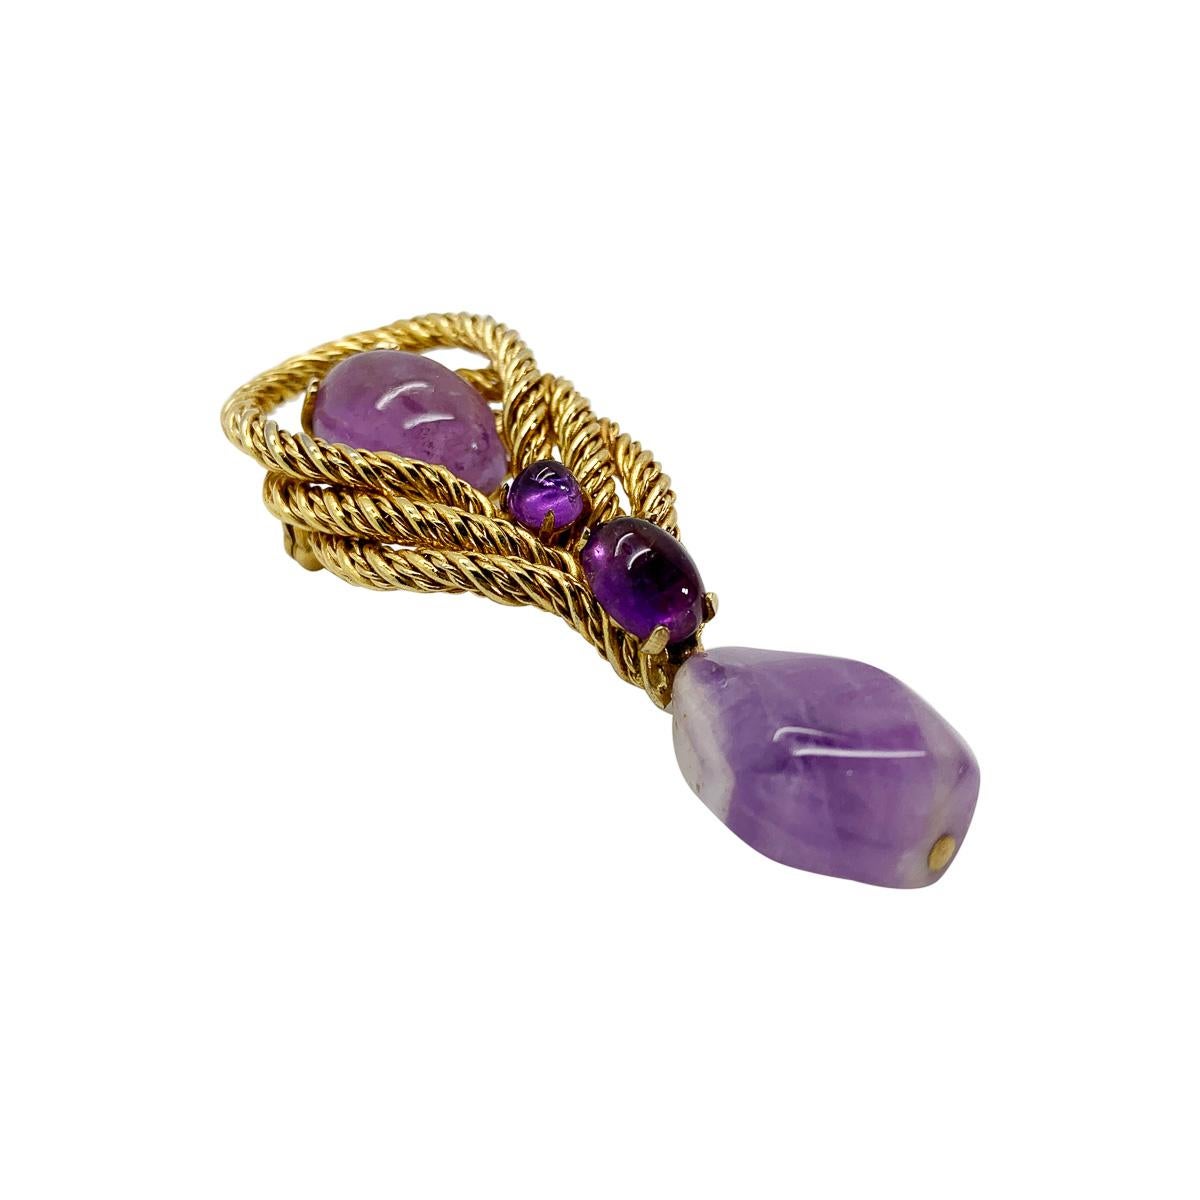 A sublime vintage Dior Amethyst Brooch. Large, tumbled amethyst stones and cabochons sit amongst twisted golden hoops to create a beautifully elegant design. With archive pieces from her own Dior collection displayed in London's highly acclaimed